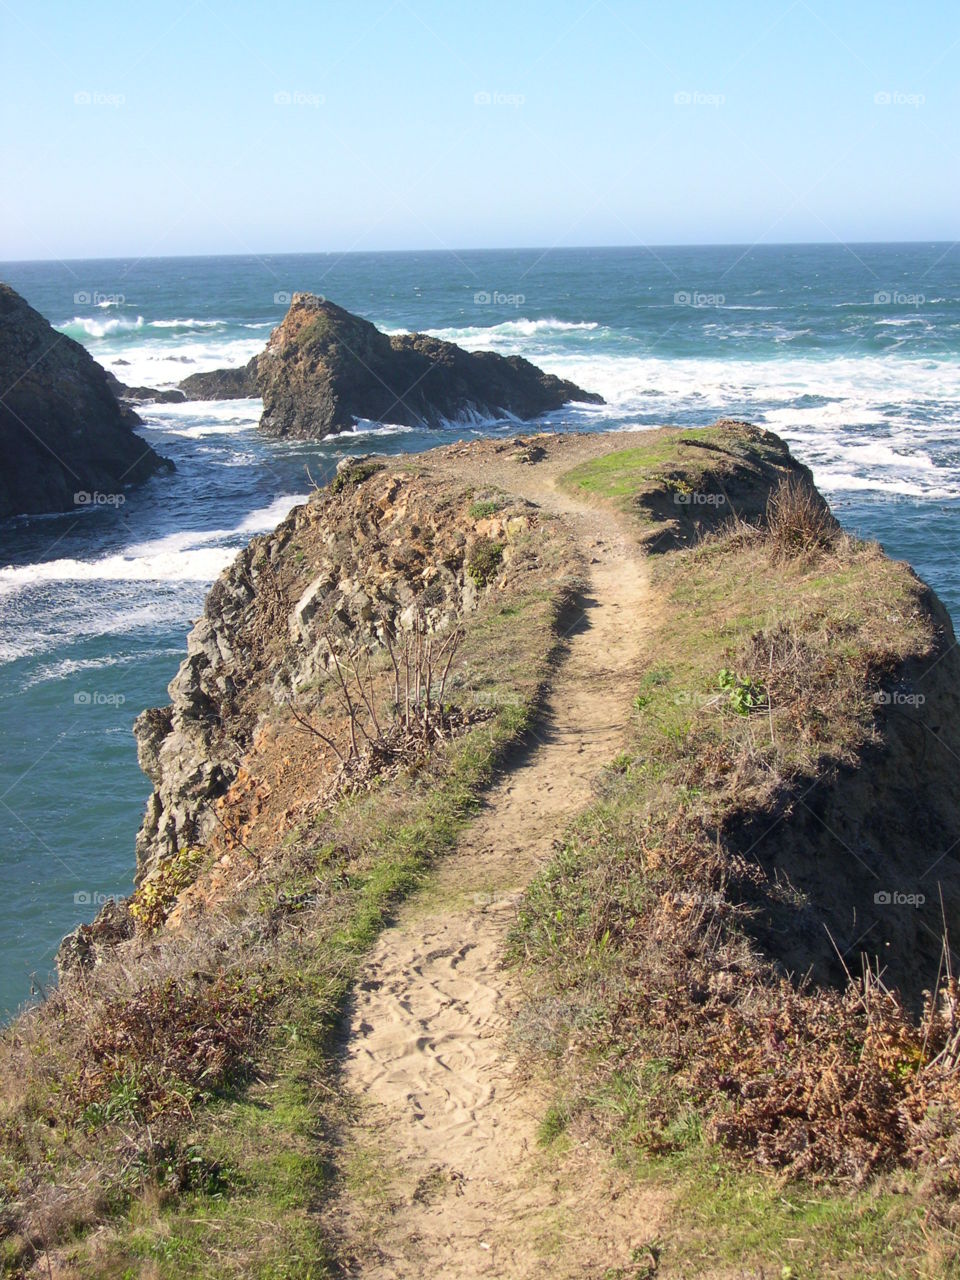 Pathway to the sea. Pathway in the Mendocino headlands